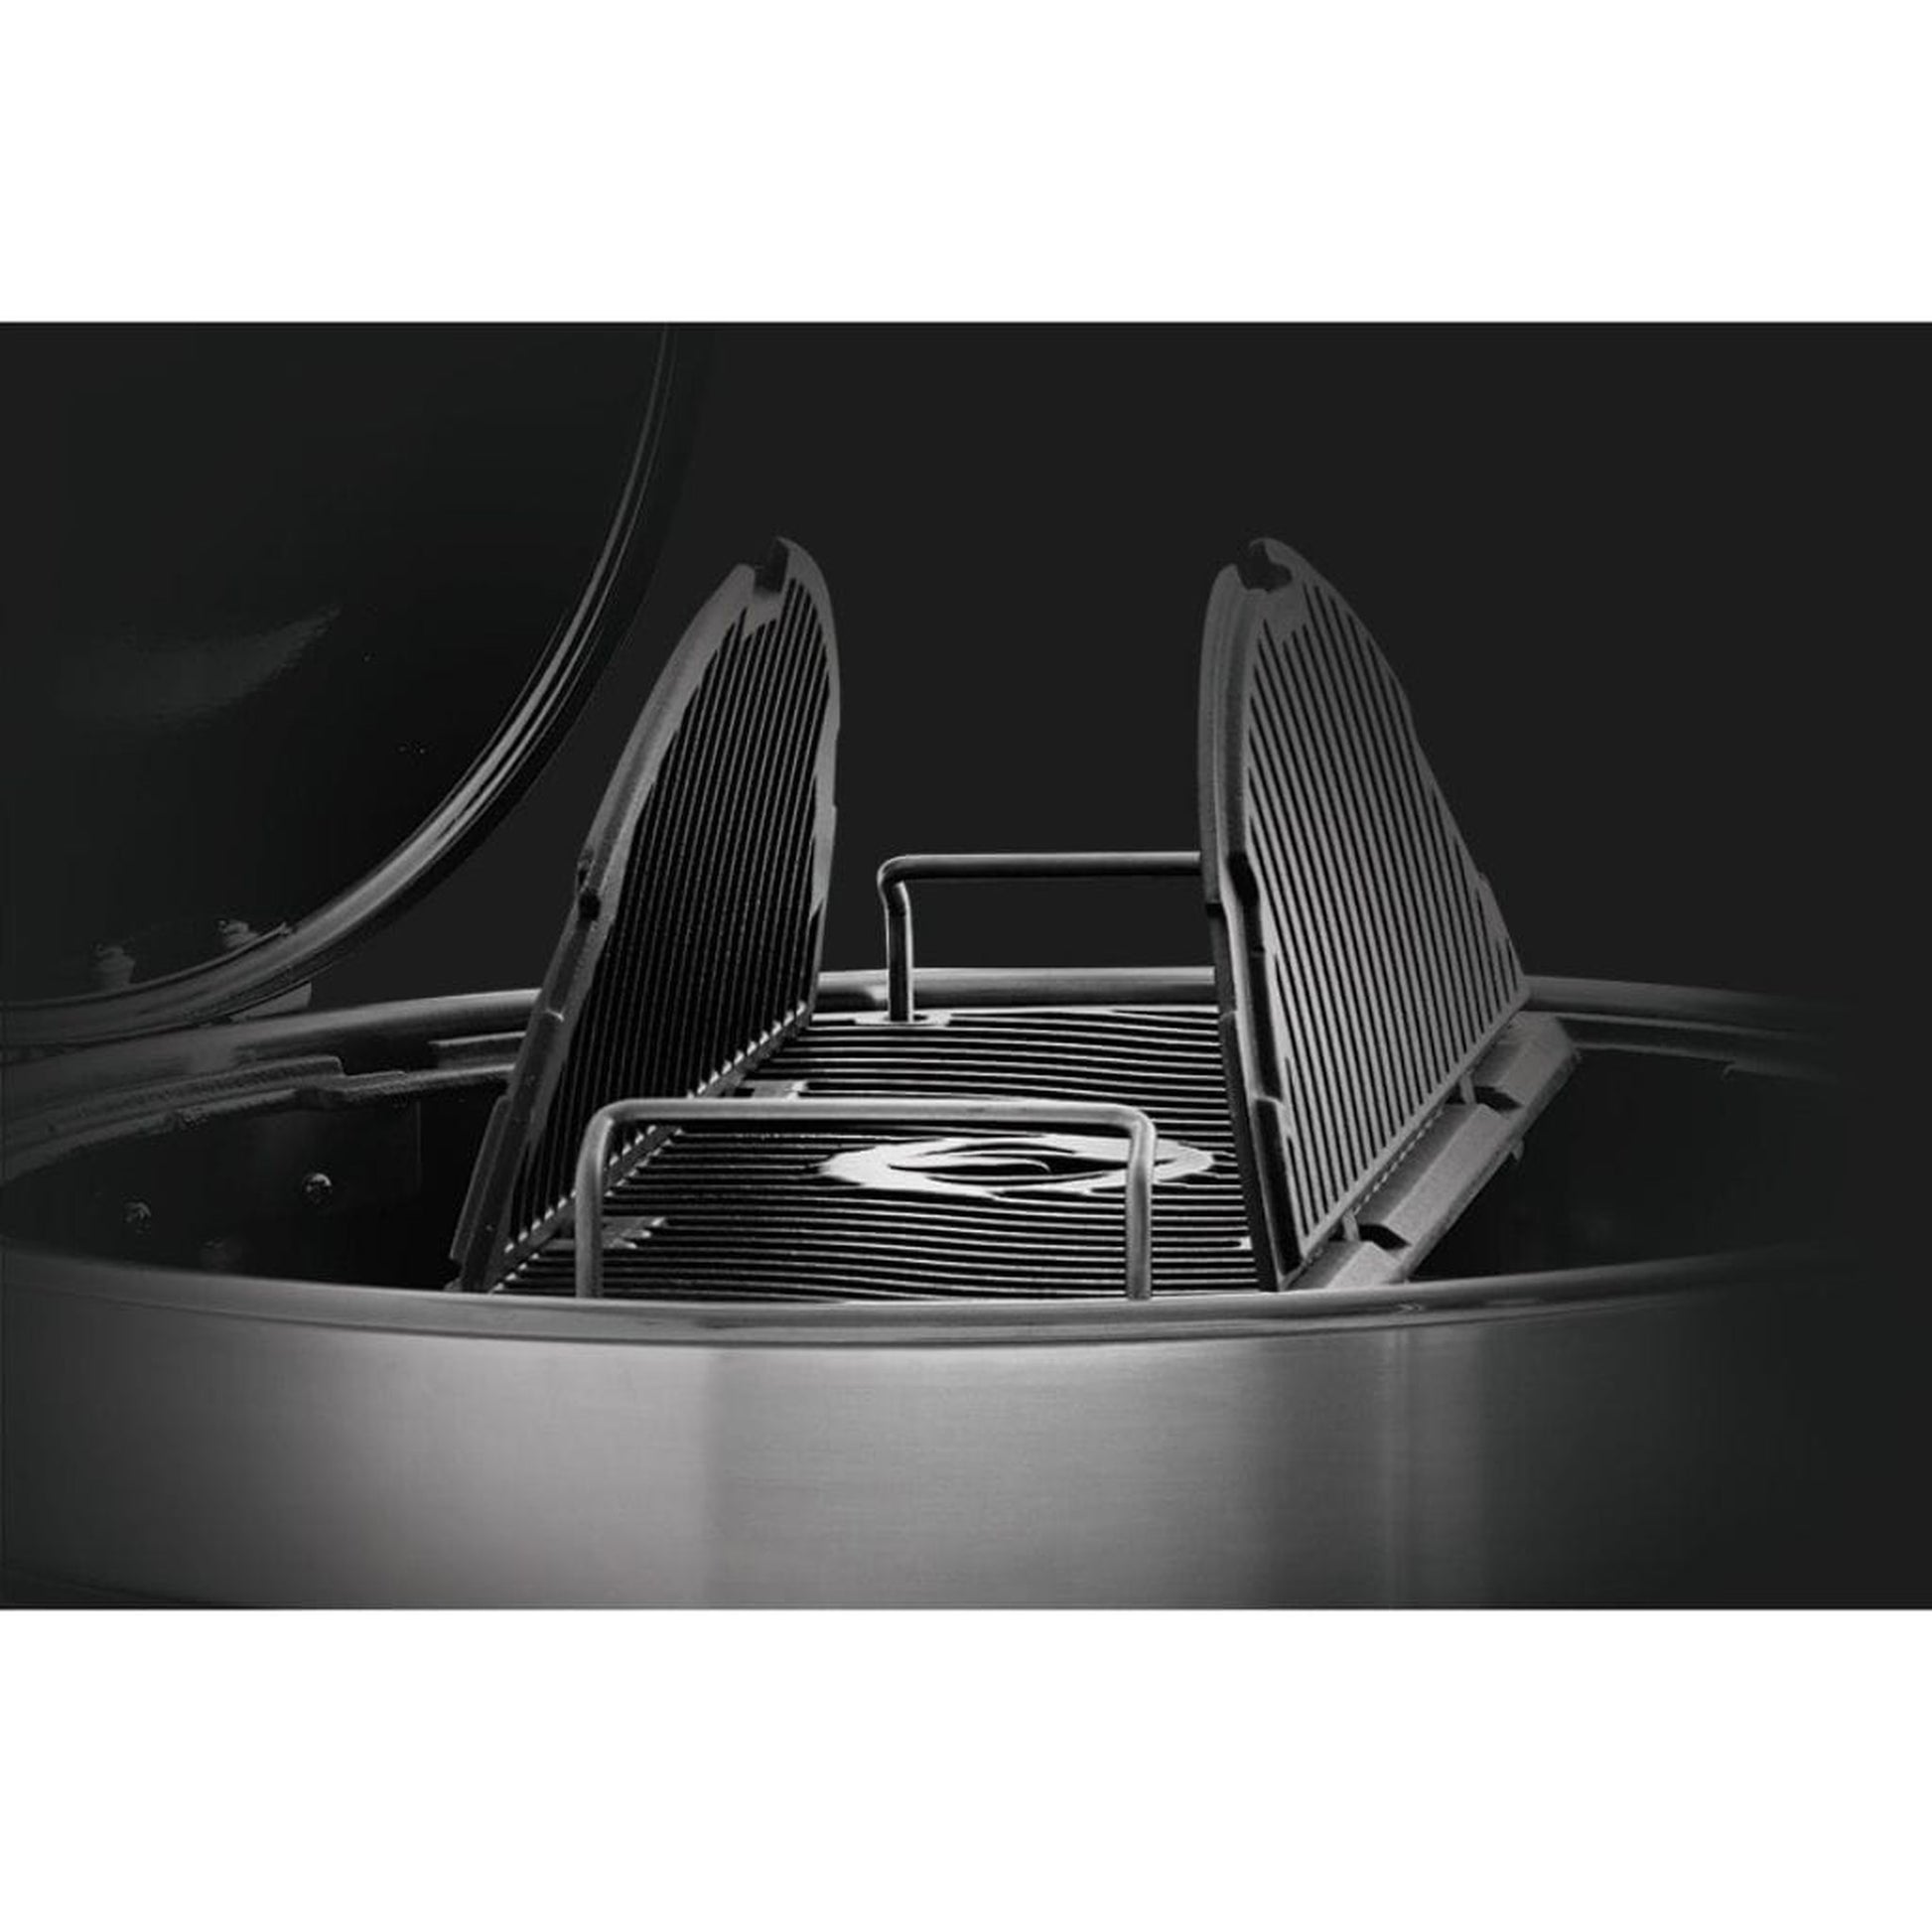 Napoleon 45" PRO Cart Charcoal Kettle Grill